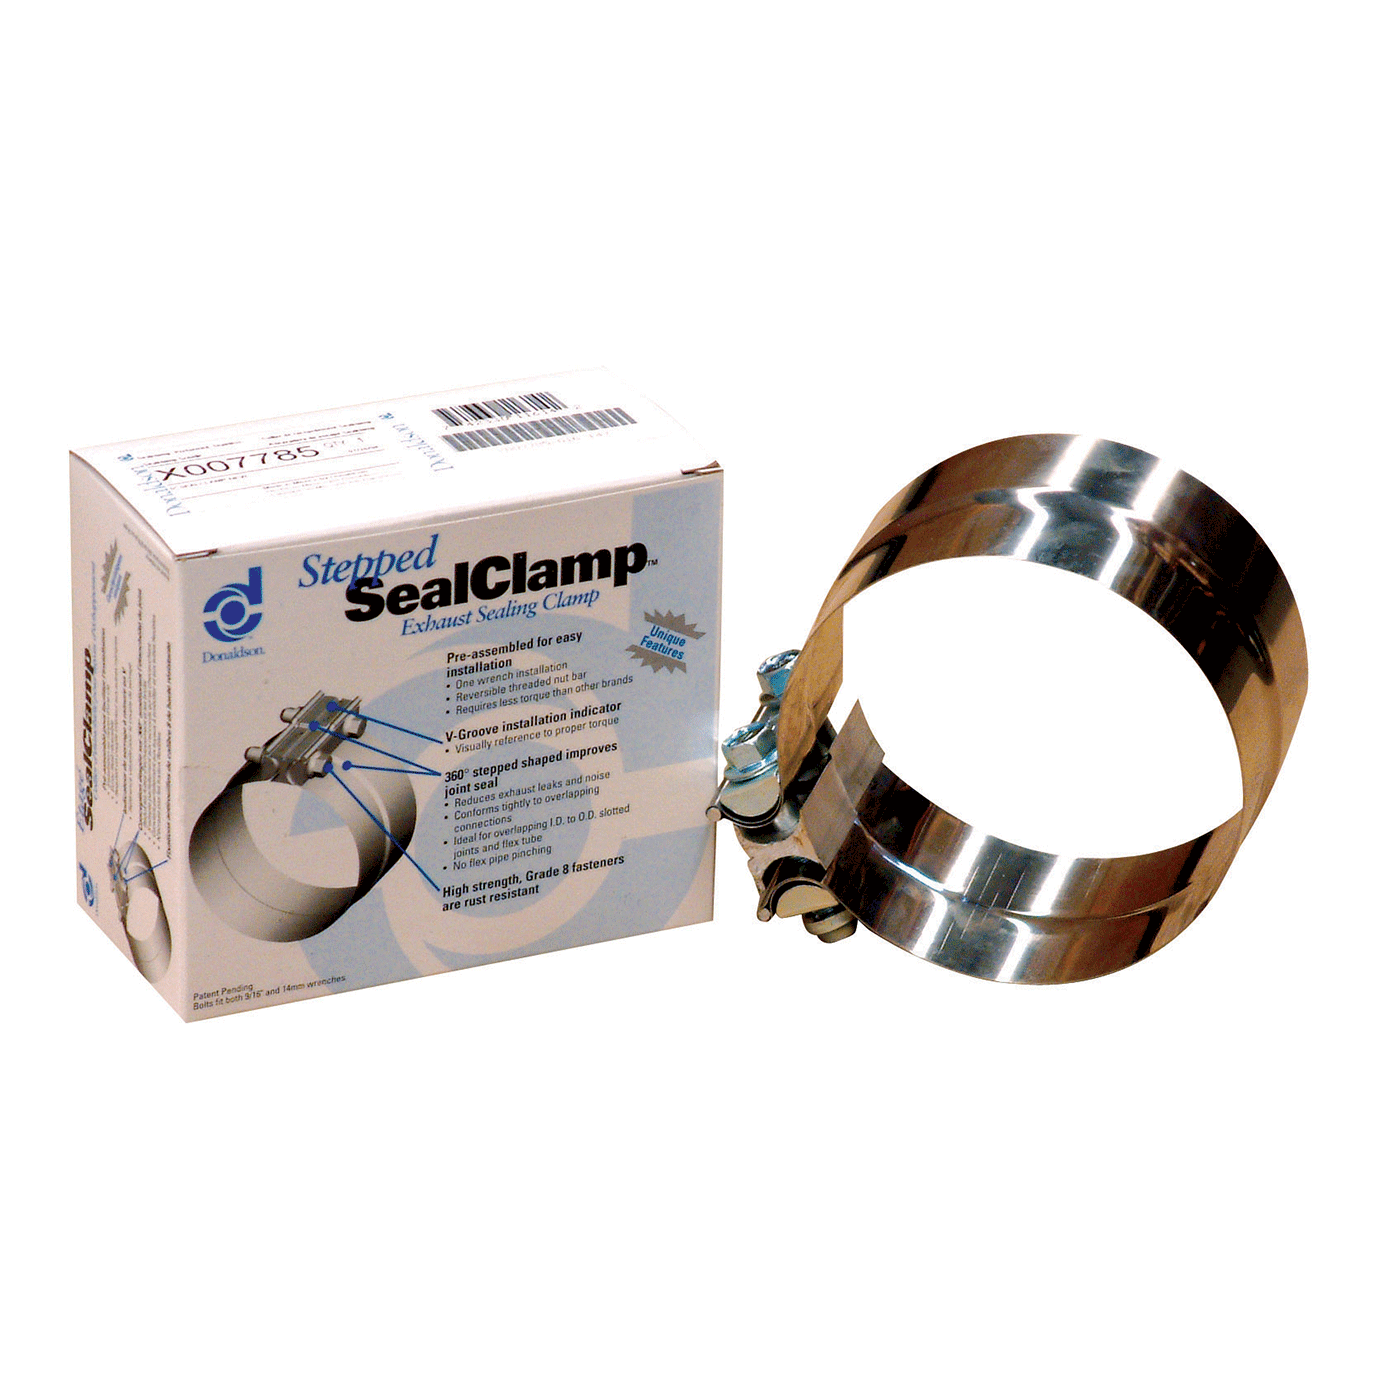 Clamp Stainless Steel 5"